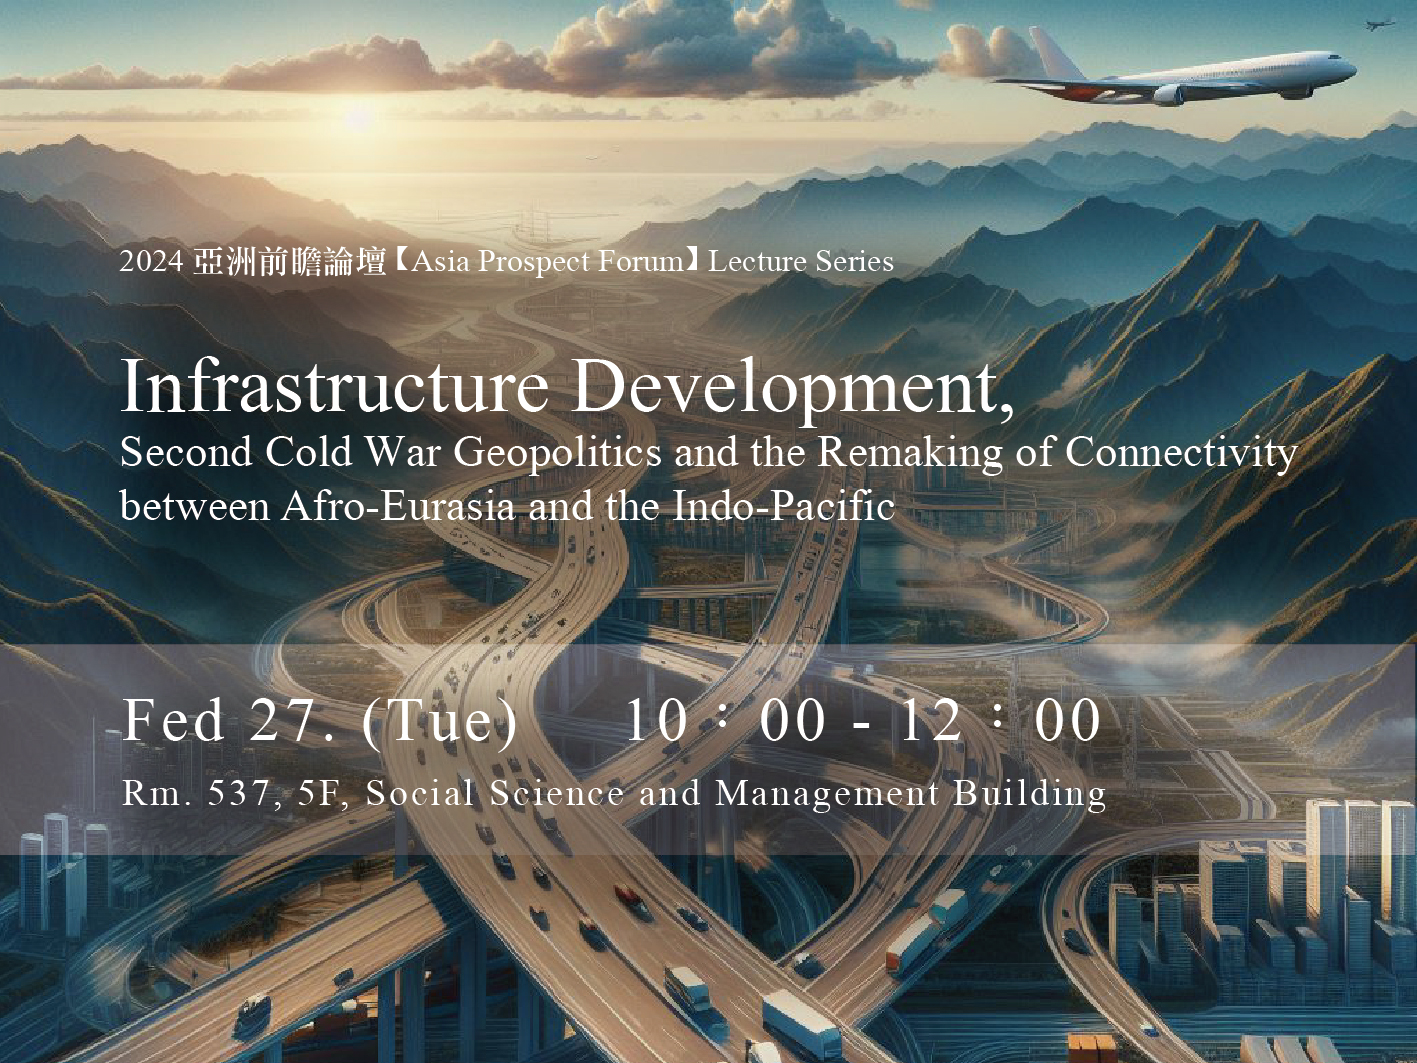 Infrastructure Development, Second Cold War Geopolitics and the Remaking of Connectivity between Afro-Eurasia and the Indo-Pacific